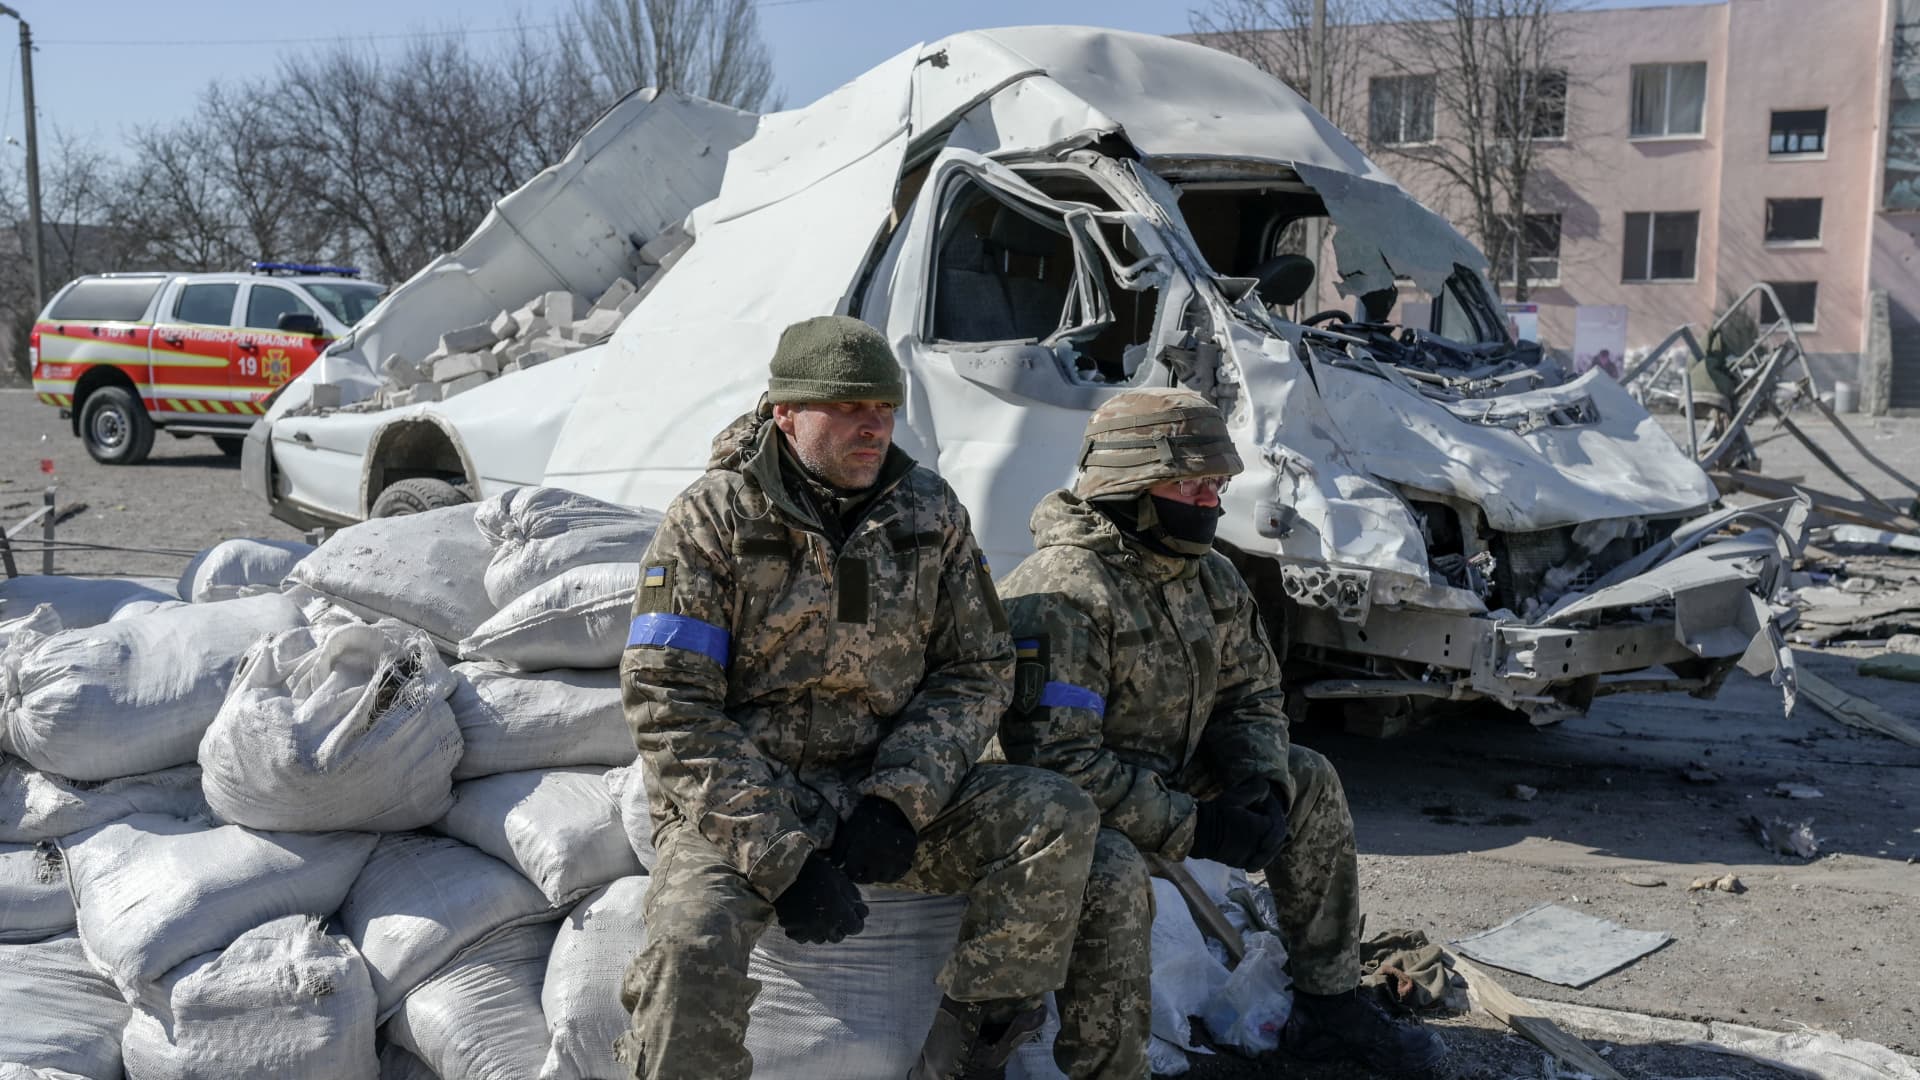 Ukrainian soldiers sit next to the military school hit by Russian rockets the day before, in Mykolaiv, southern Ukraine, on March 19, 2022.